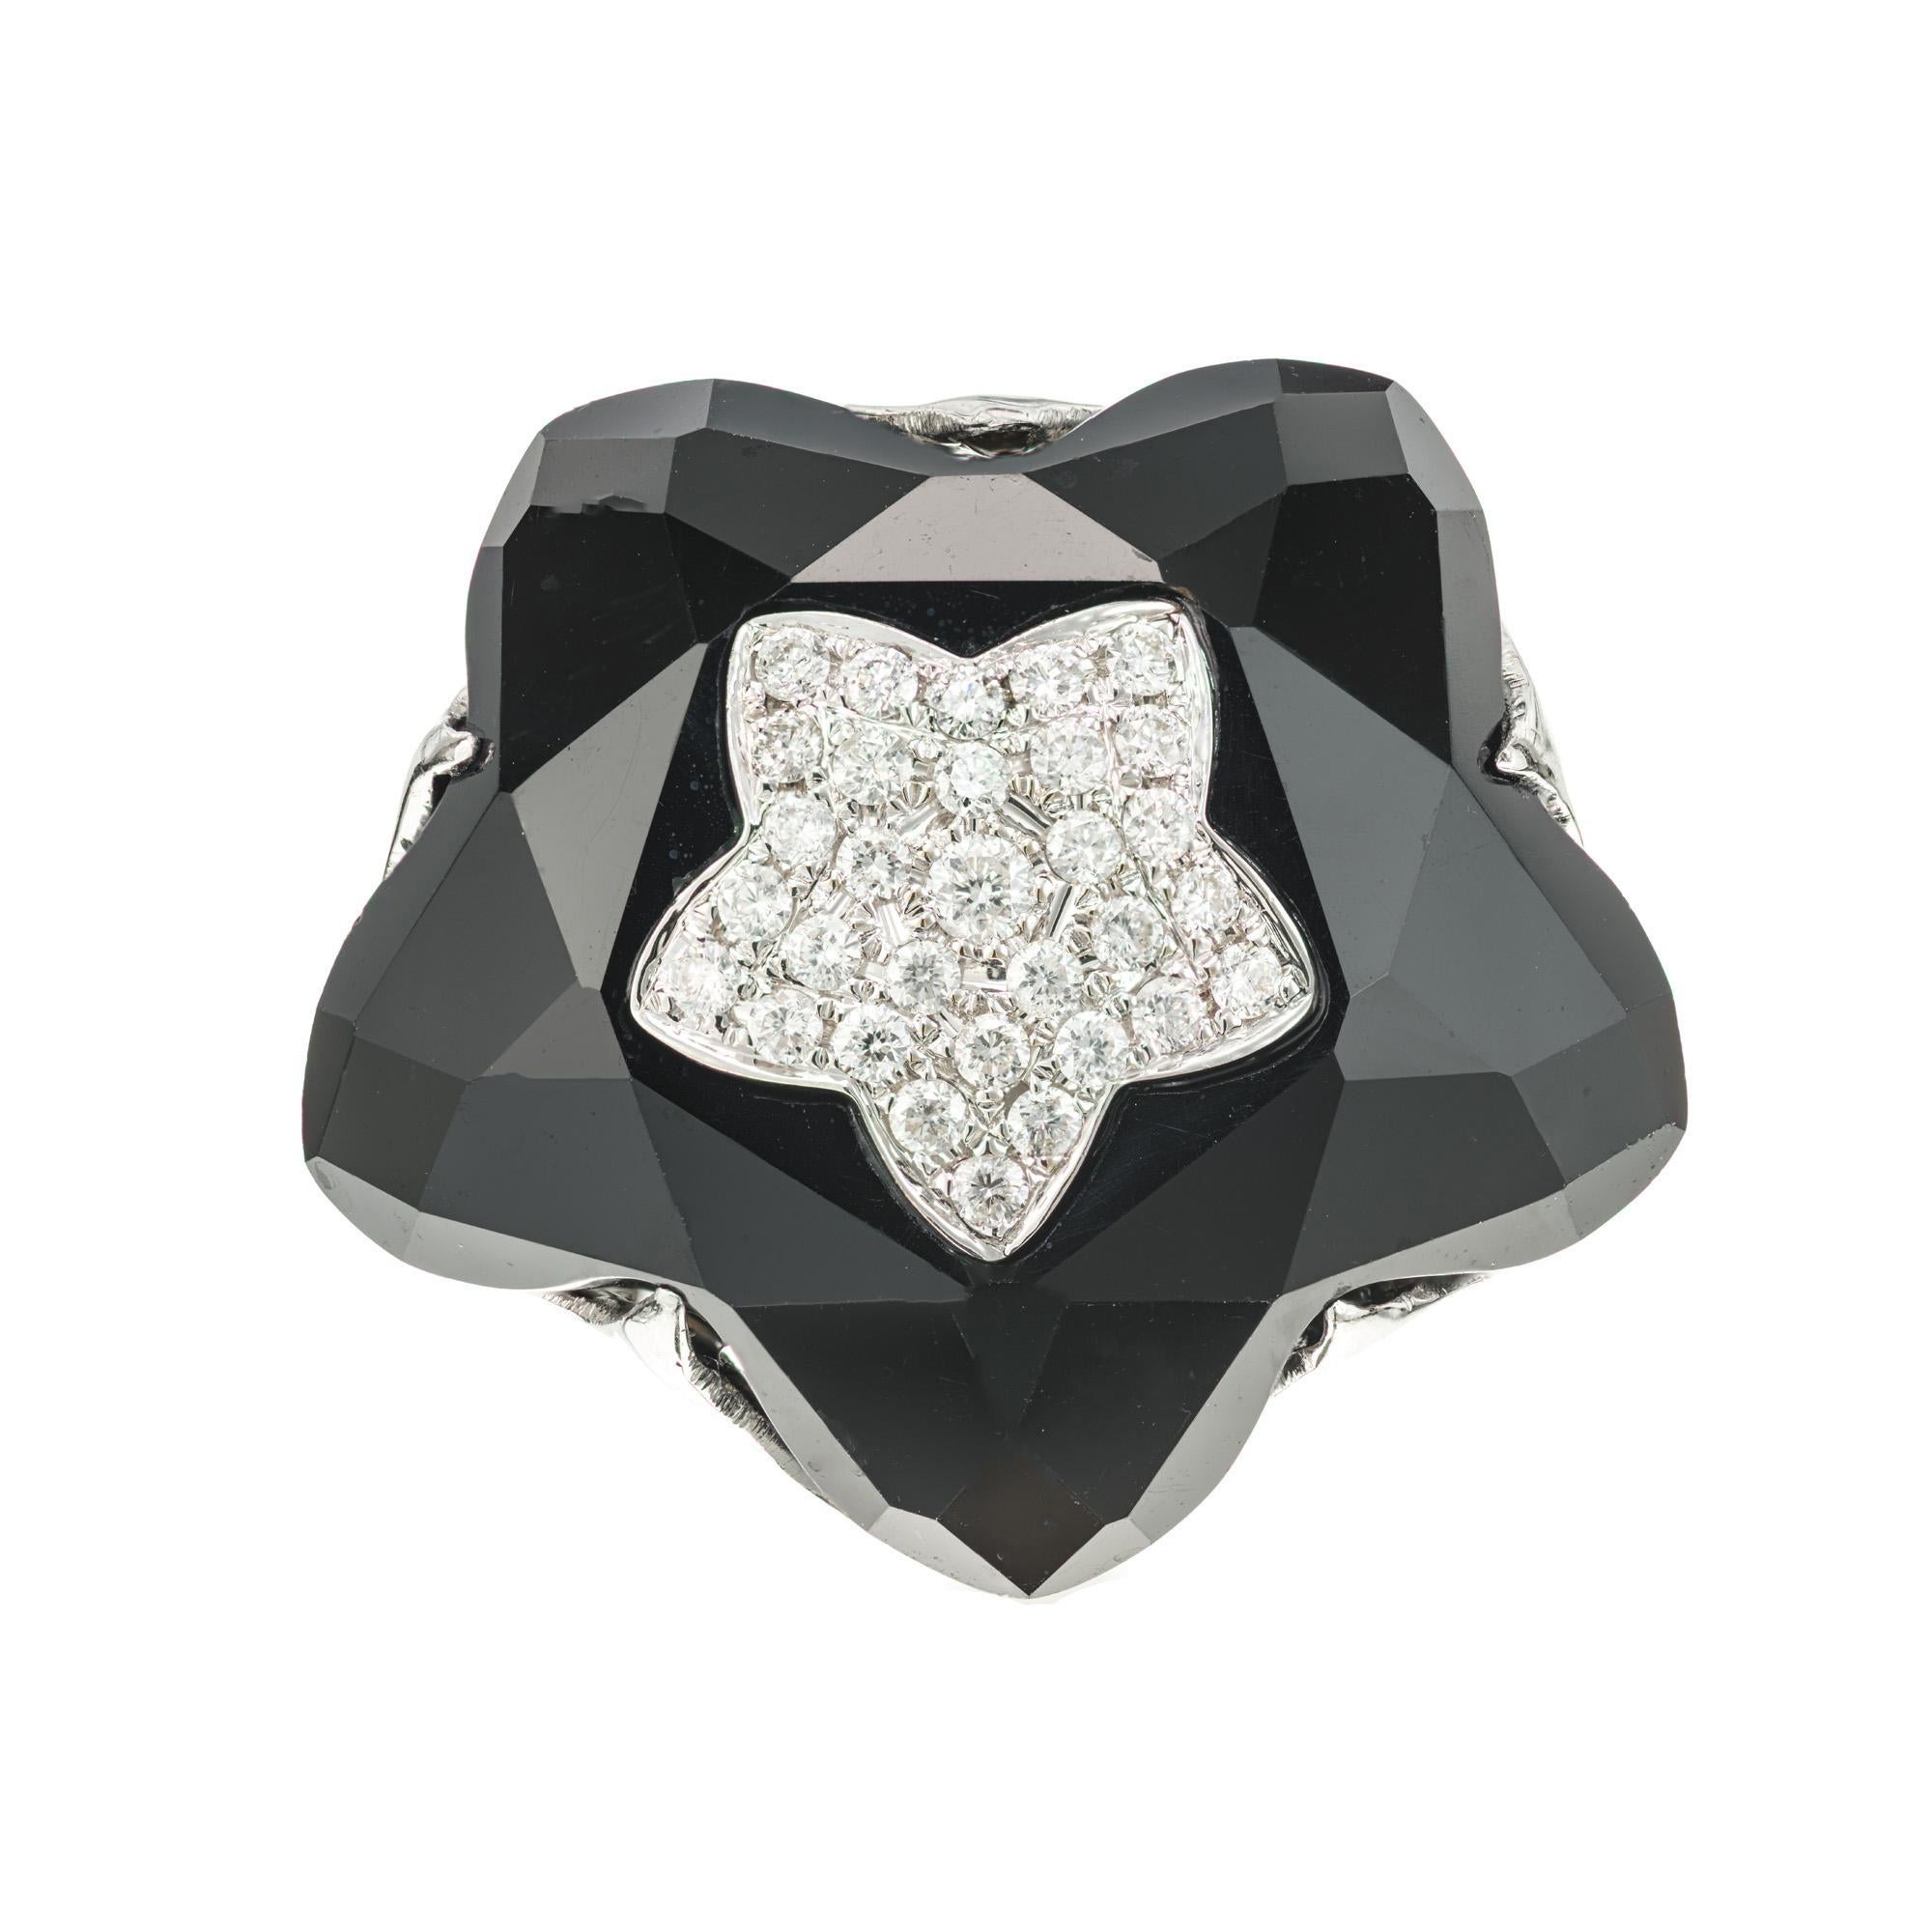 Black onyx and pave diamond star cluster cocktail ring. 81 round brilliant cut diamonds approximately .98cts set in a star cluster design with in a larger onyx star halo. 18k white gold. circa 2000

81 round brilliant cut diamonds, G-H VS SI approx.